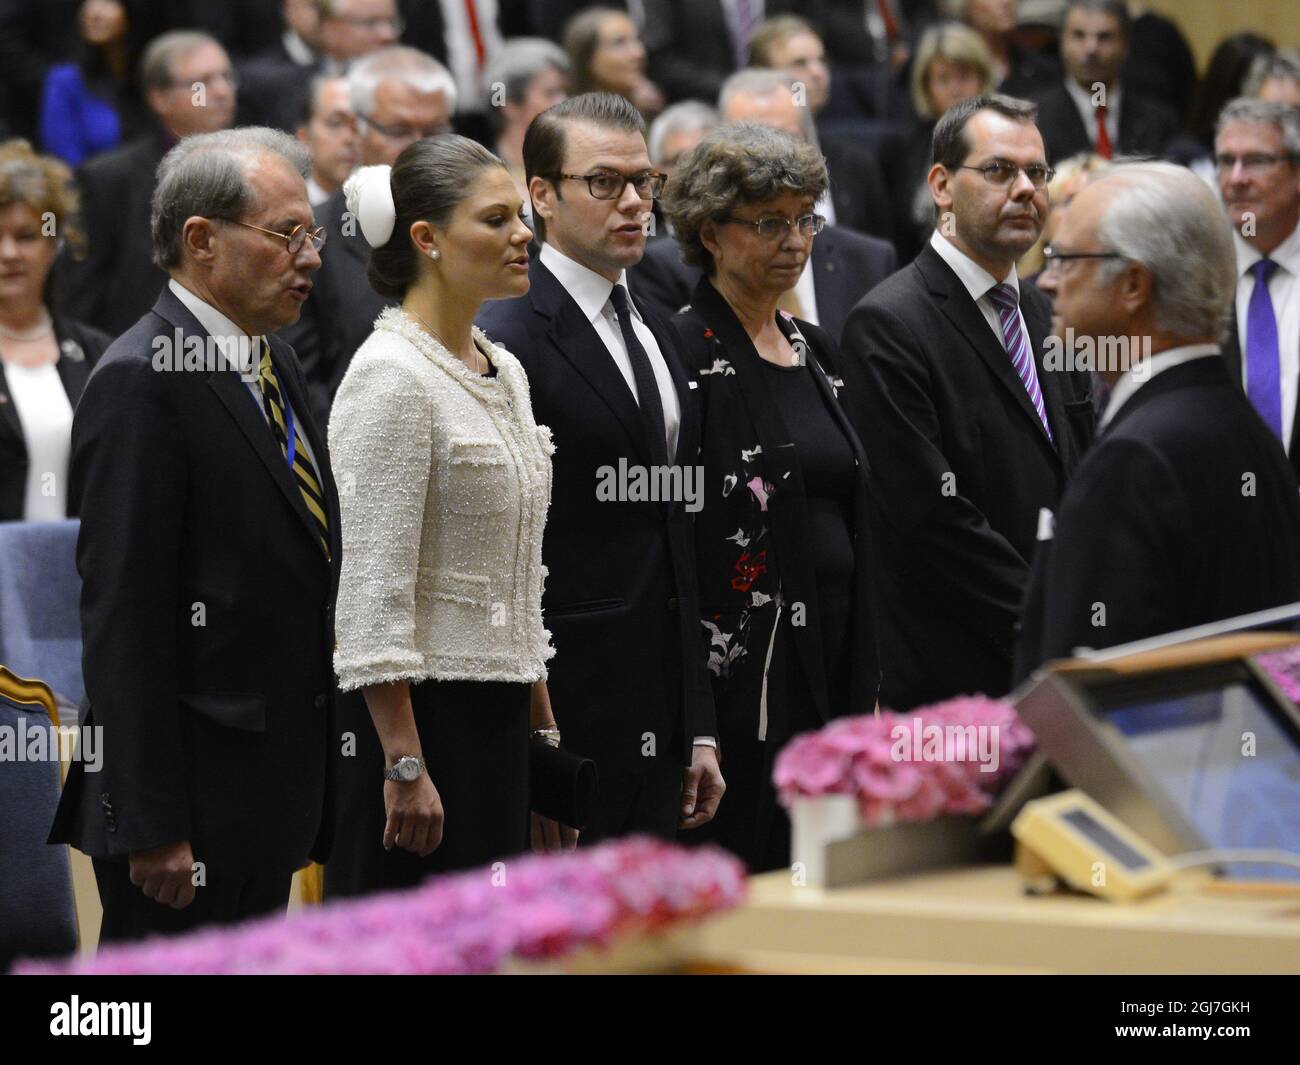 STOCKHOLM 2012-09-18 The Speaker of the Parliament Mr., Per Westerberg, Crown Prince Victoria and Prince Daniel and King Carl Gustaf are seen during the opening of the Parliament in Stockholm, Sweden, September 18, 2012.   Foto Claudio Bresciani / SCANPIX / kod 10090 Stock Photo